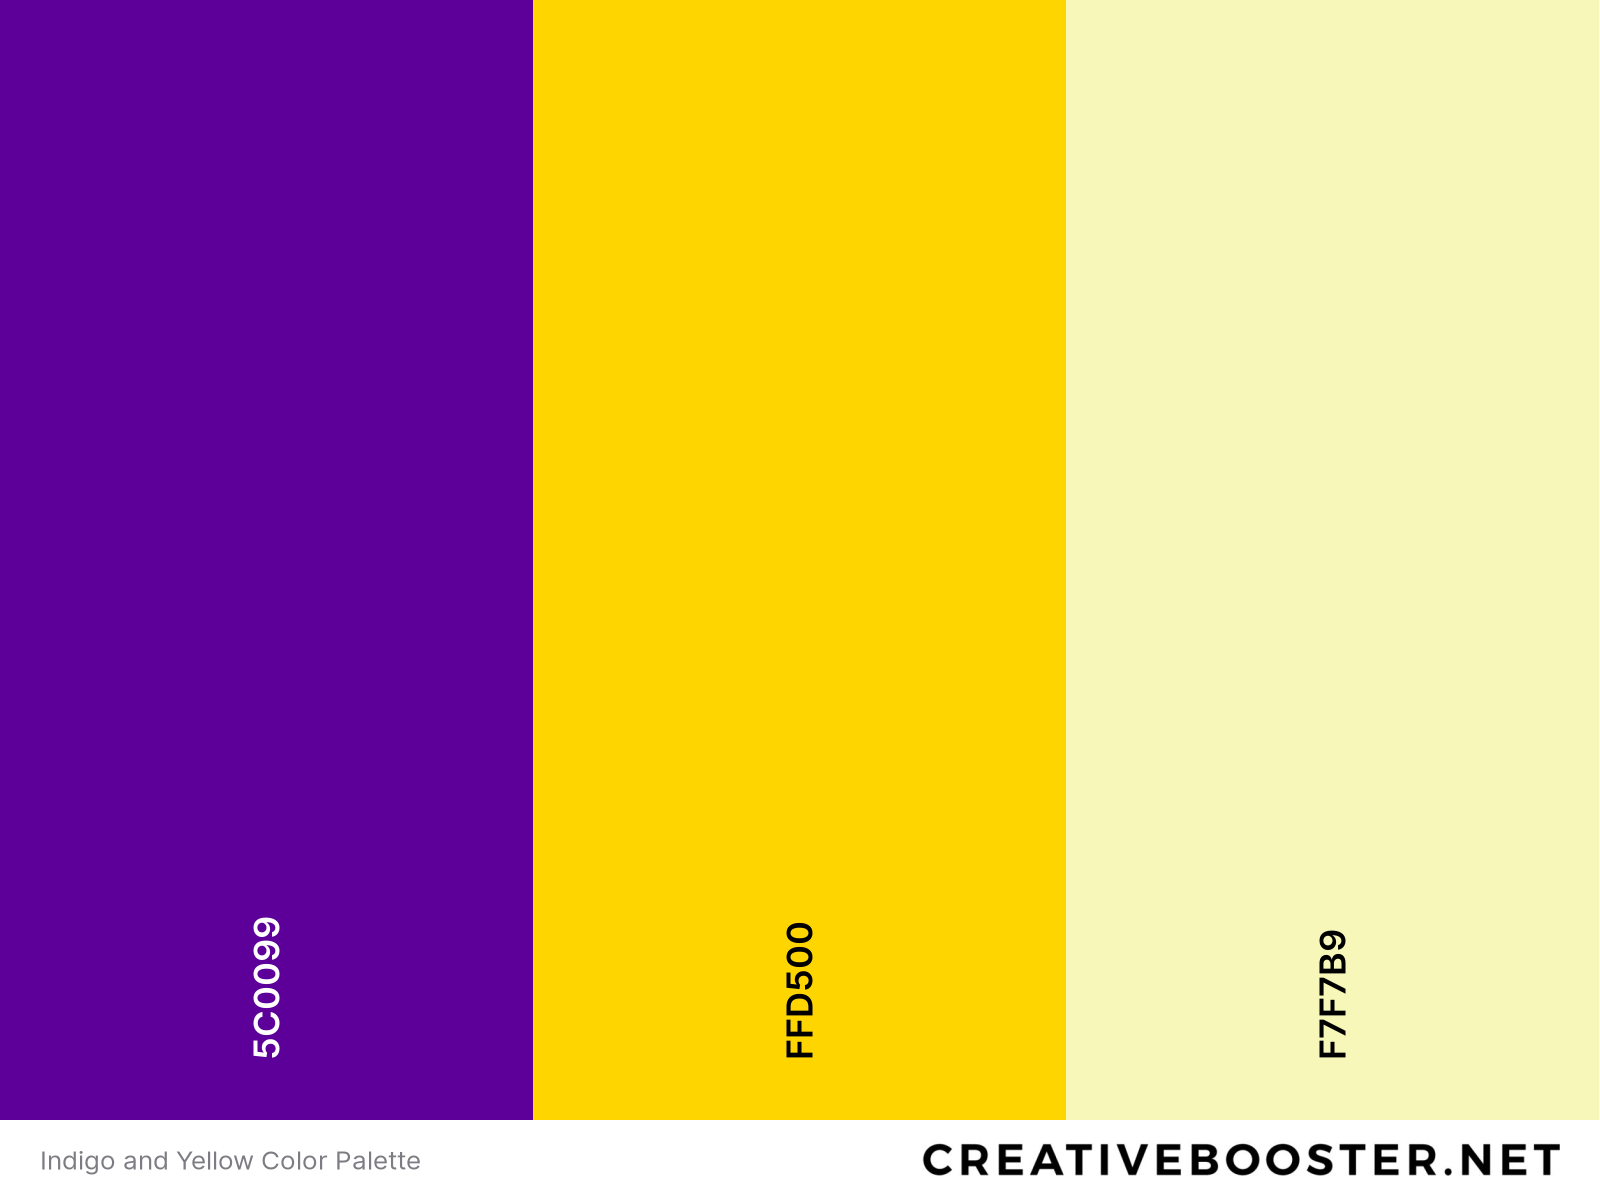 Indigo and Yellow Color Palette